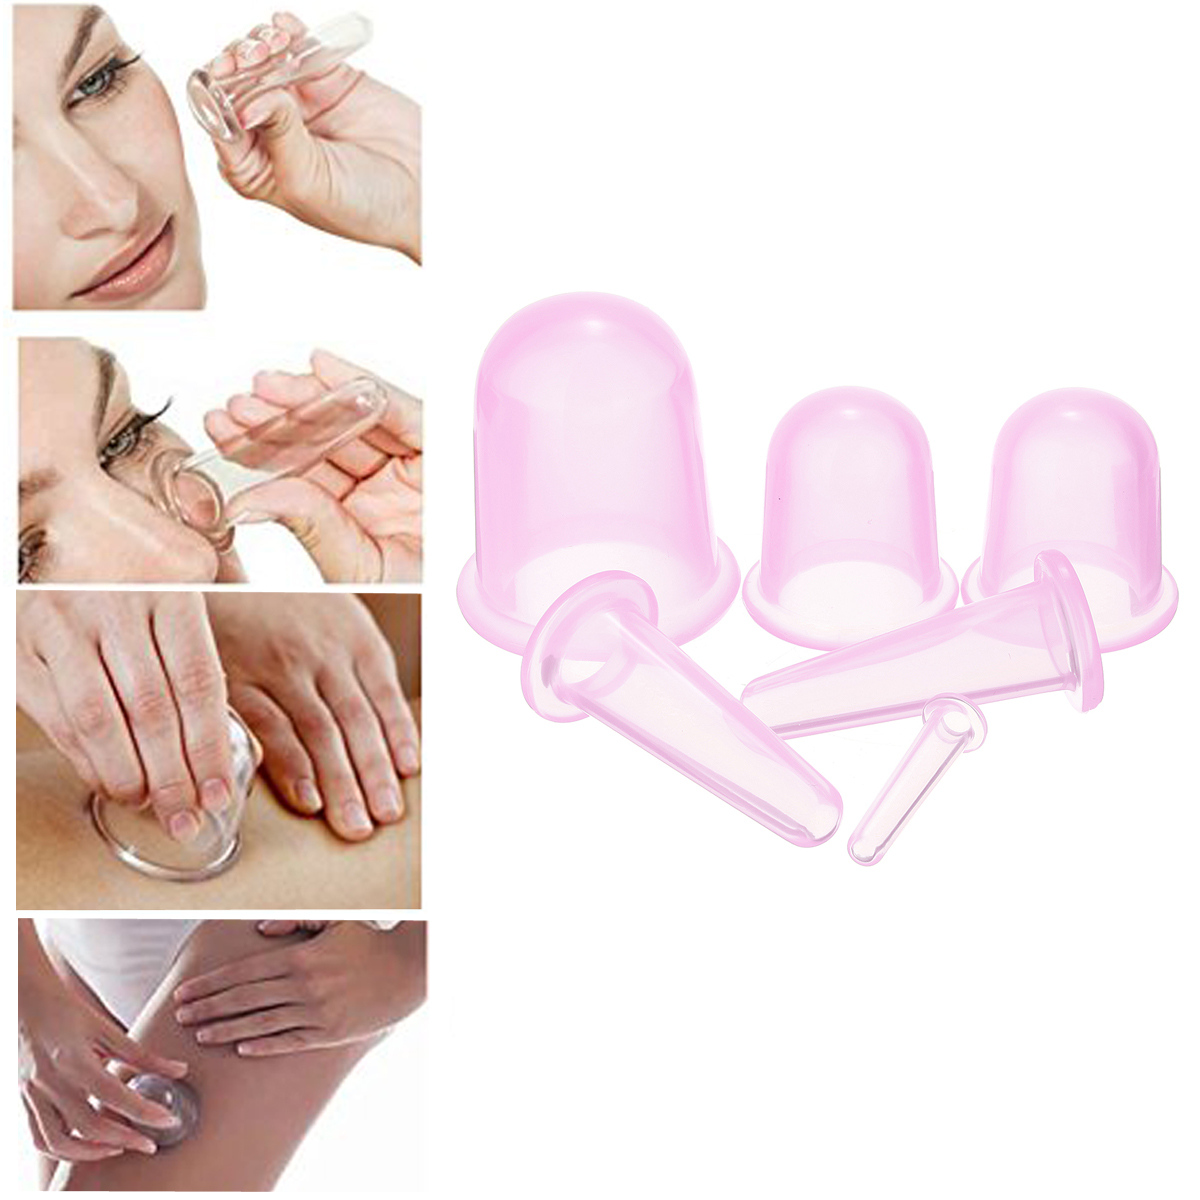 

6 Cups Silicone Cupping Body Face Massage Therapy Anti Cellulite Chinese Vacuum